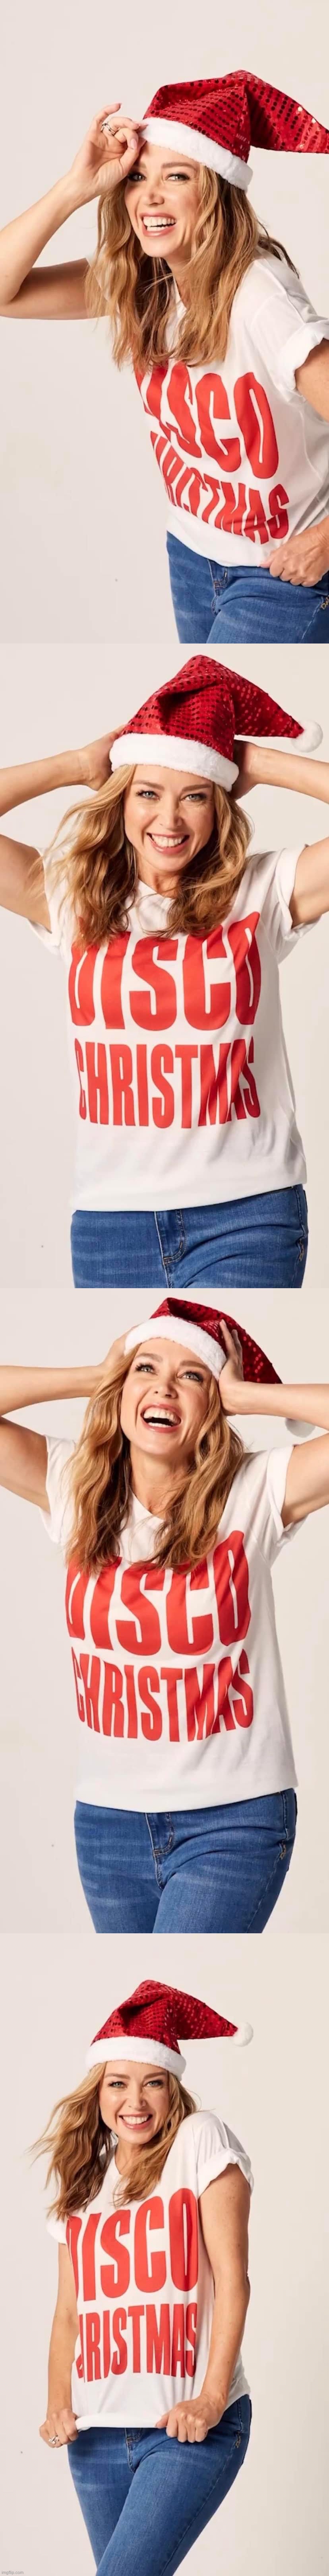 image tagged in dannii minogue disco christmas | made w/ Imgflip meme maker